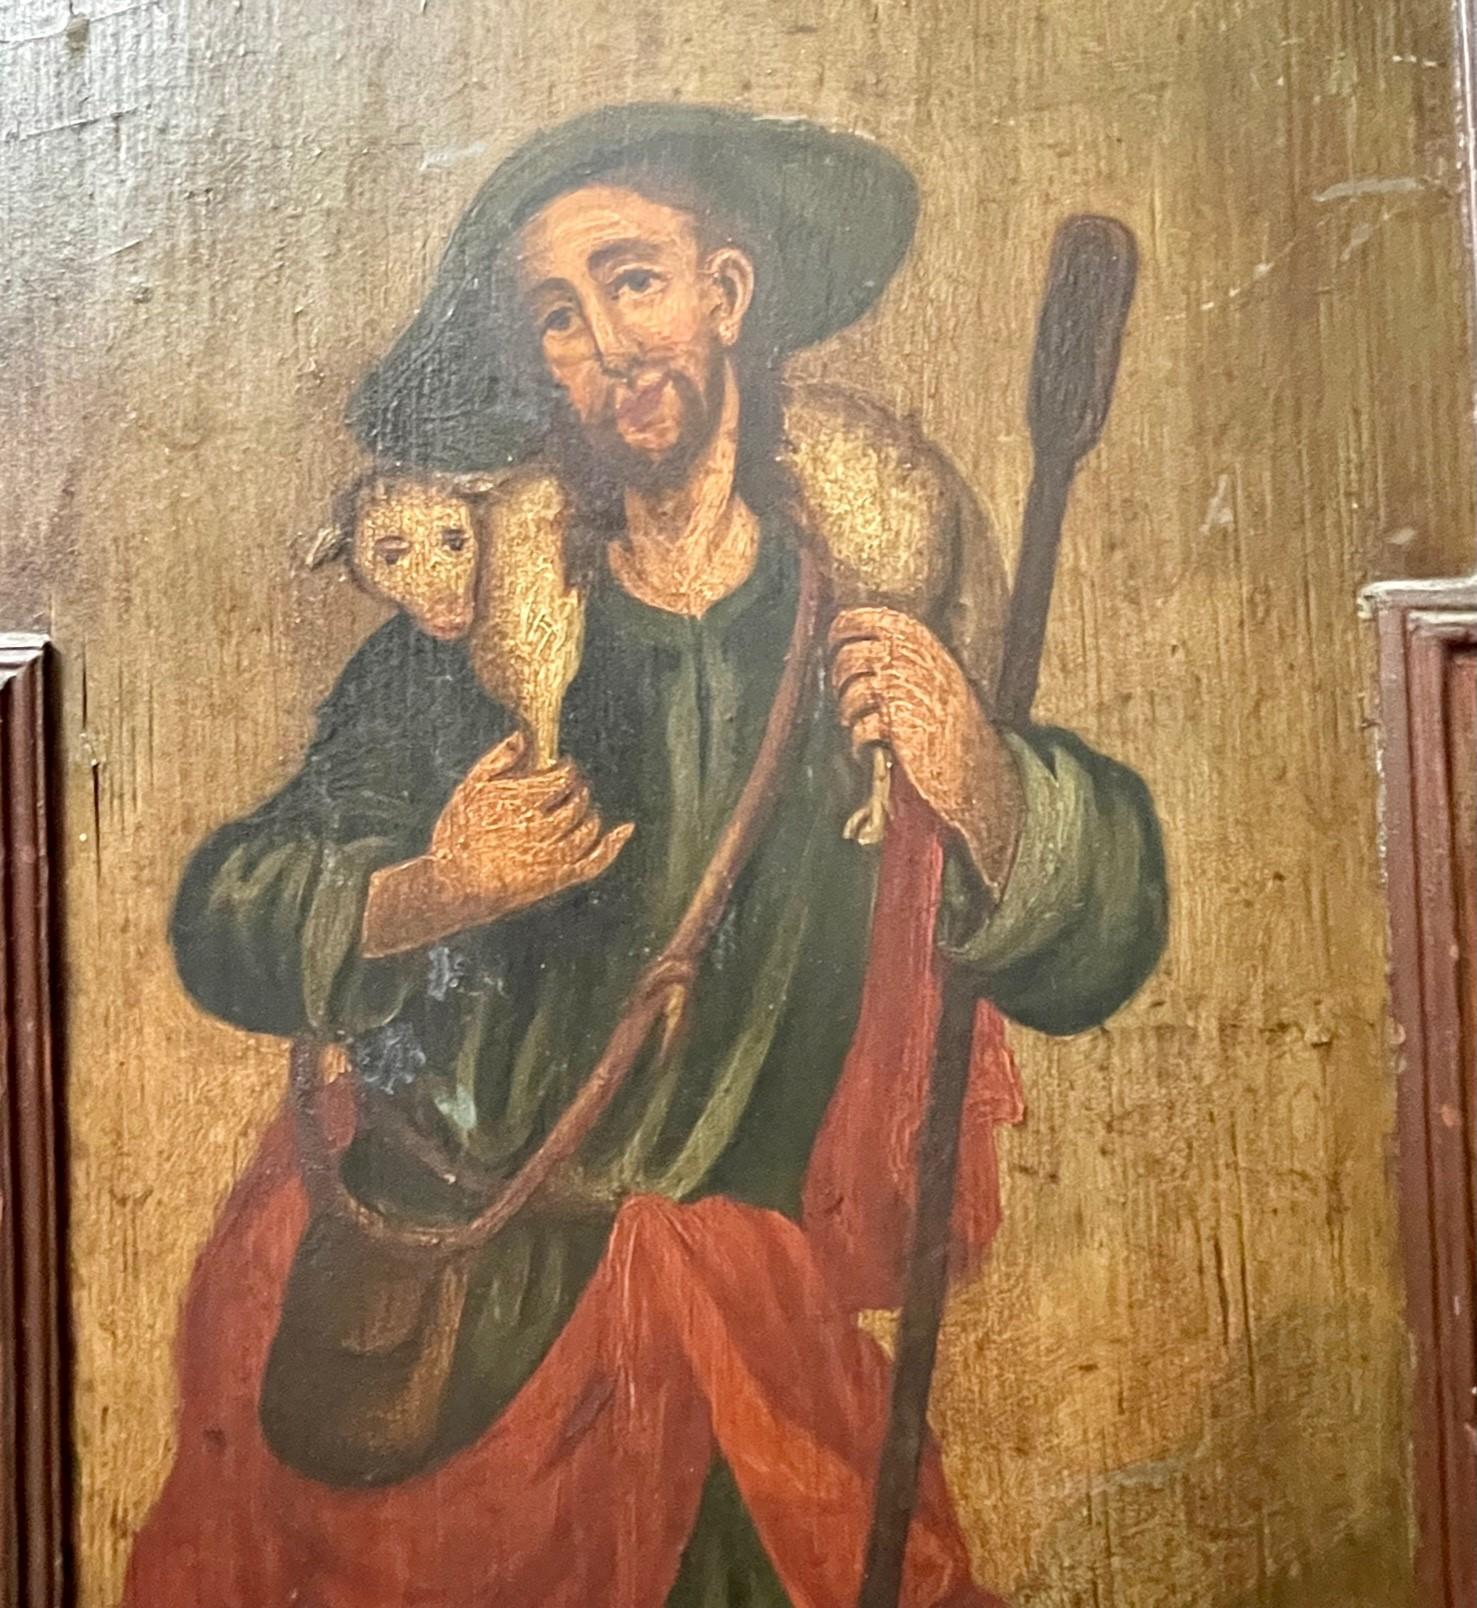 Russian 19th century icon painting on wood, The Good Shepherd

Hand painted rustic style icon painting full portrait of the Good Shepherd with his flock of sheep. The icon is painted on a large thick wooden board with a walnut frame in geometric